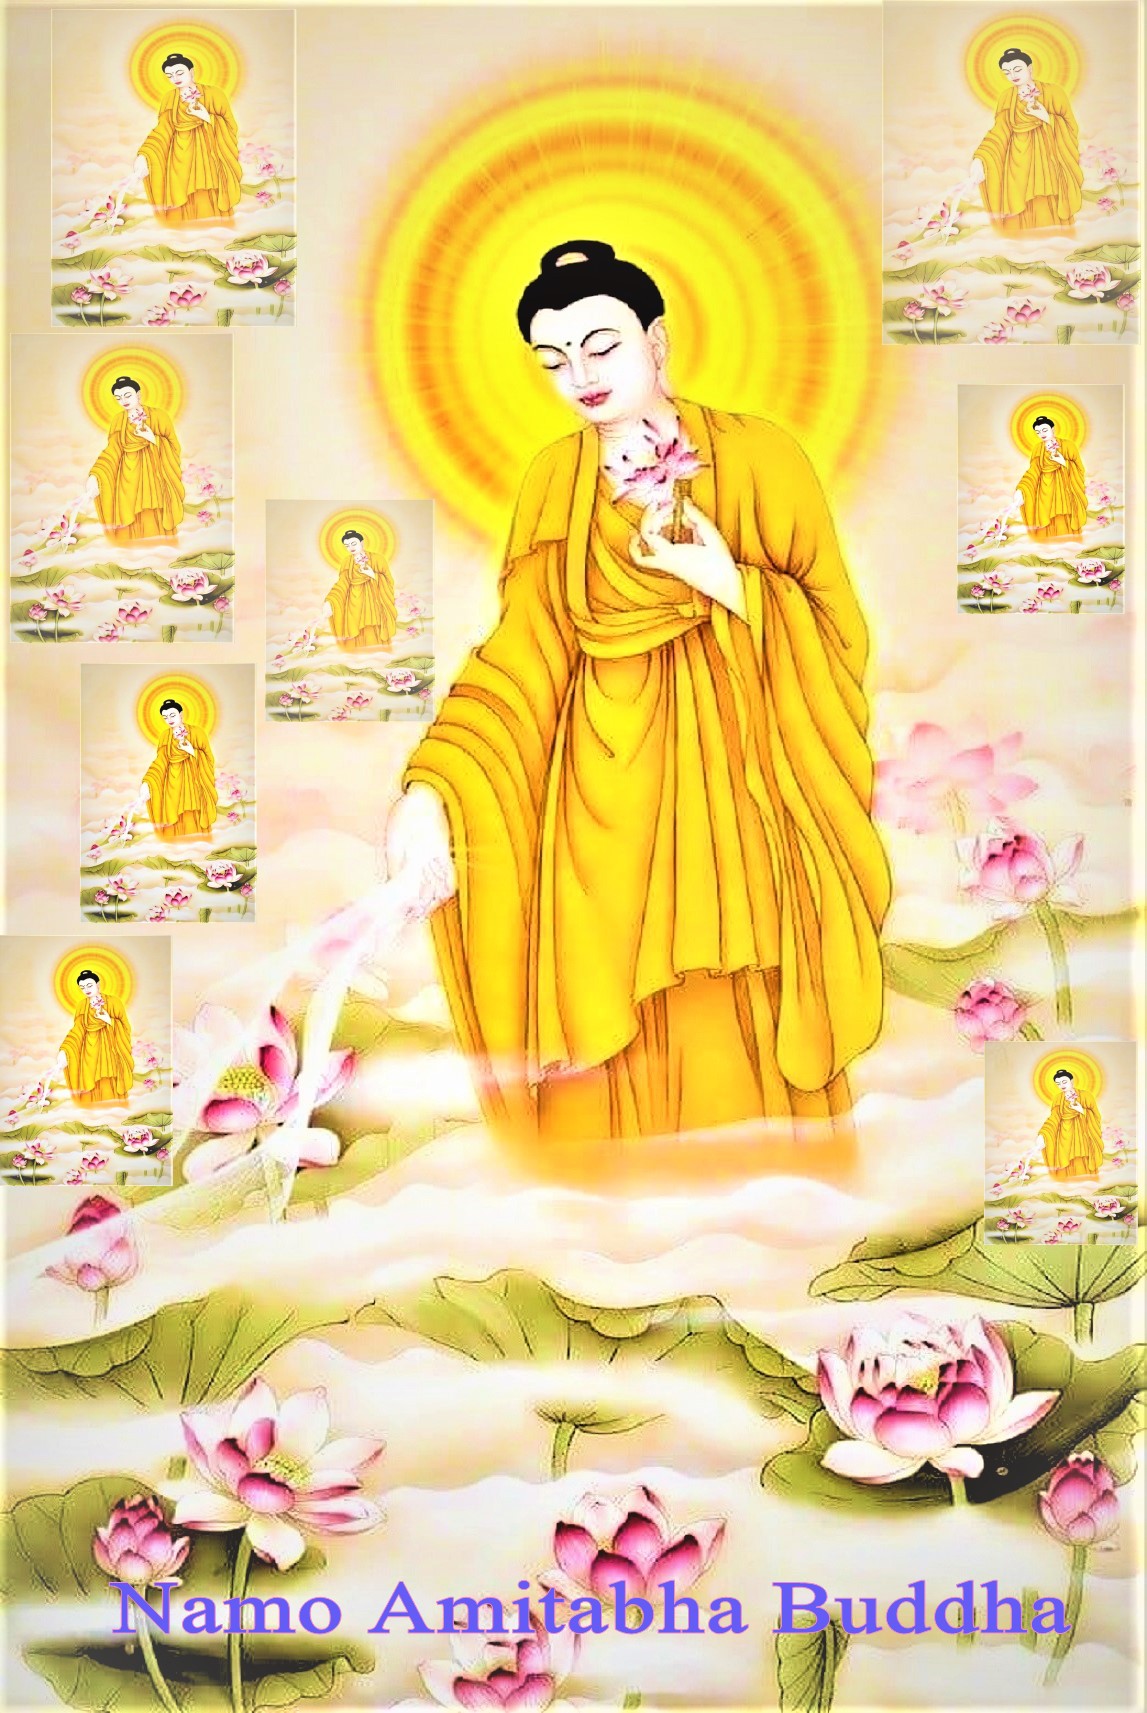 What can an Amitabha reciter do to cure his false thoughts?